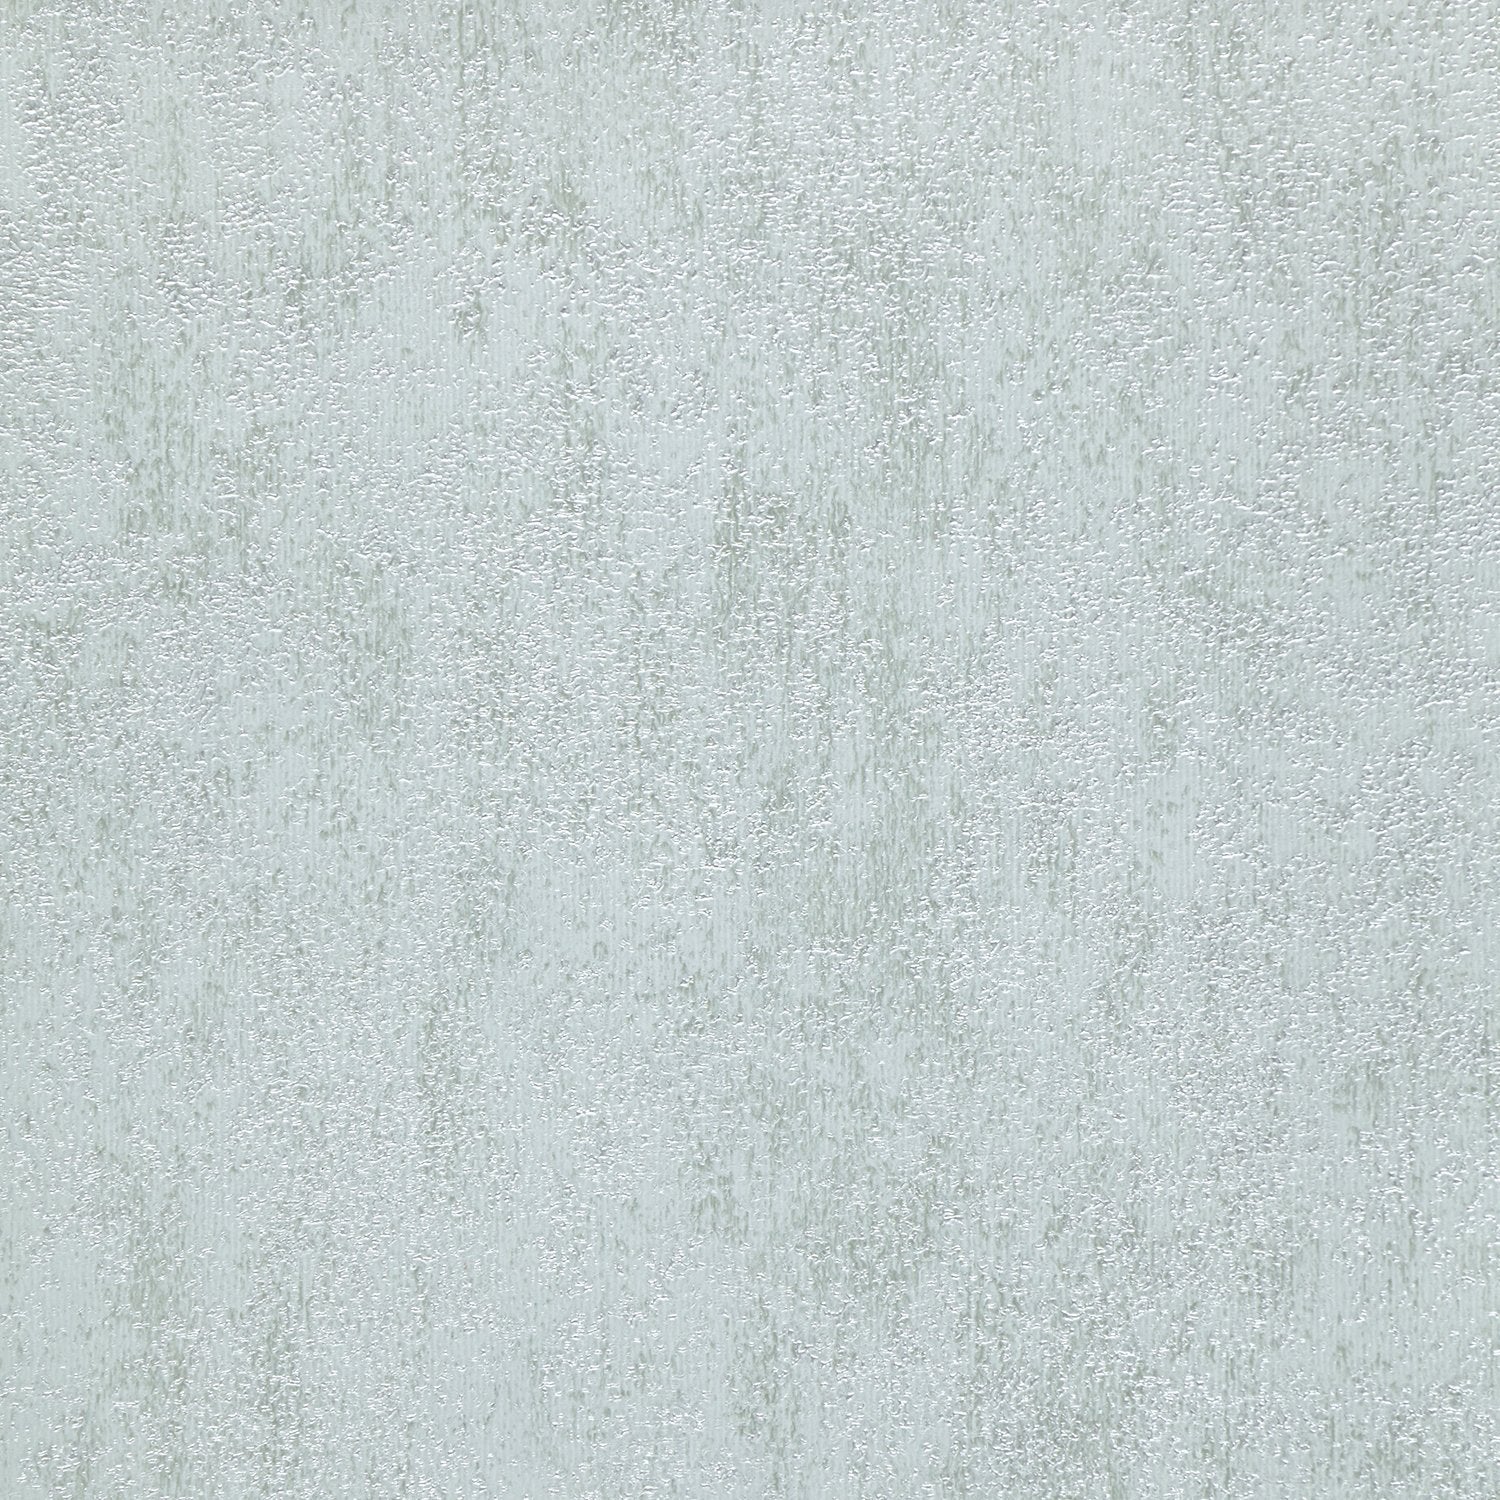 Patina Stone - Y47478 - Wallcovering - Vycon - Kube Contract